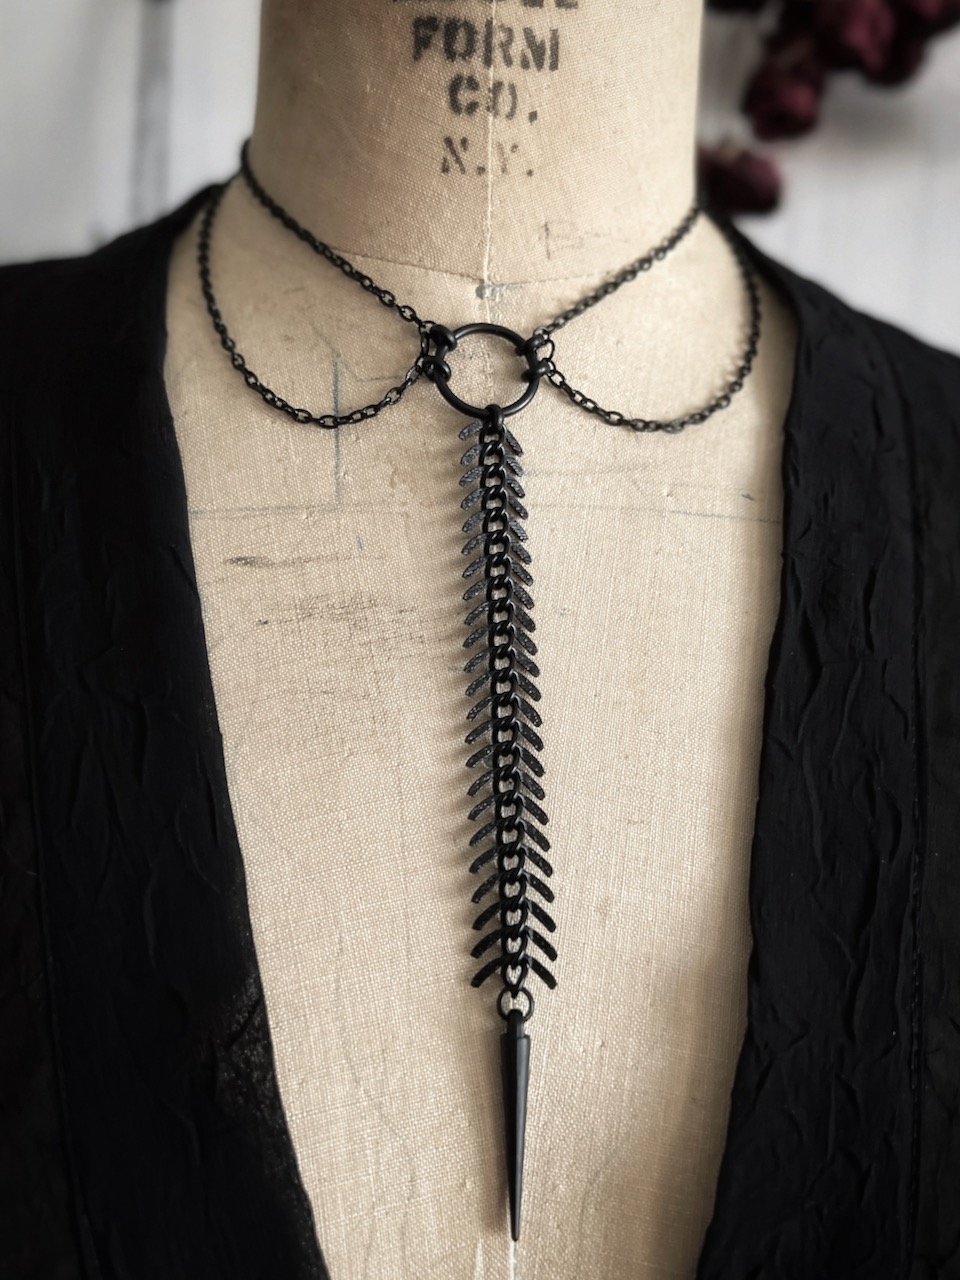 Gothic Letter Necklace – Lola James Jewelry